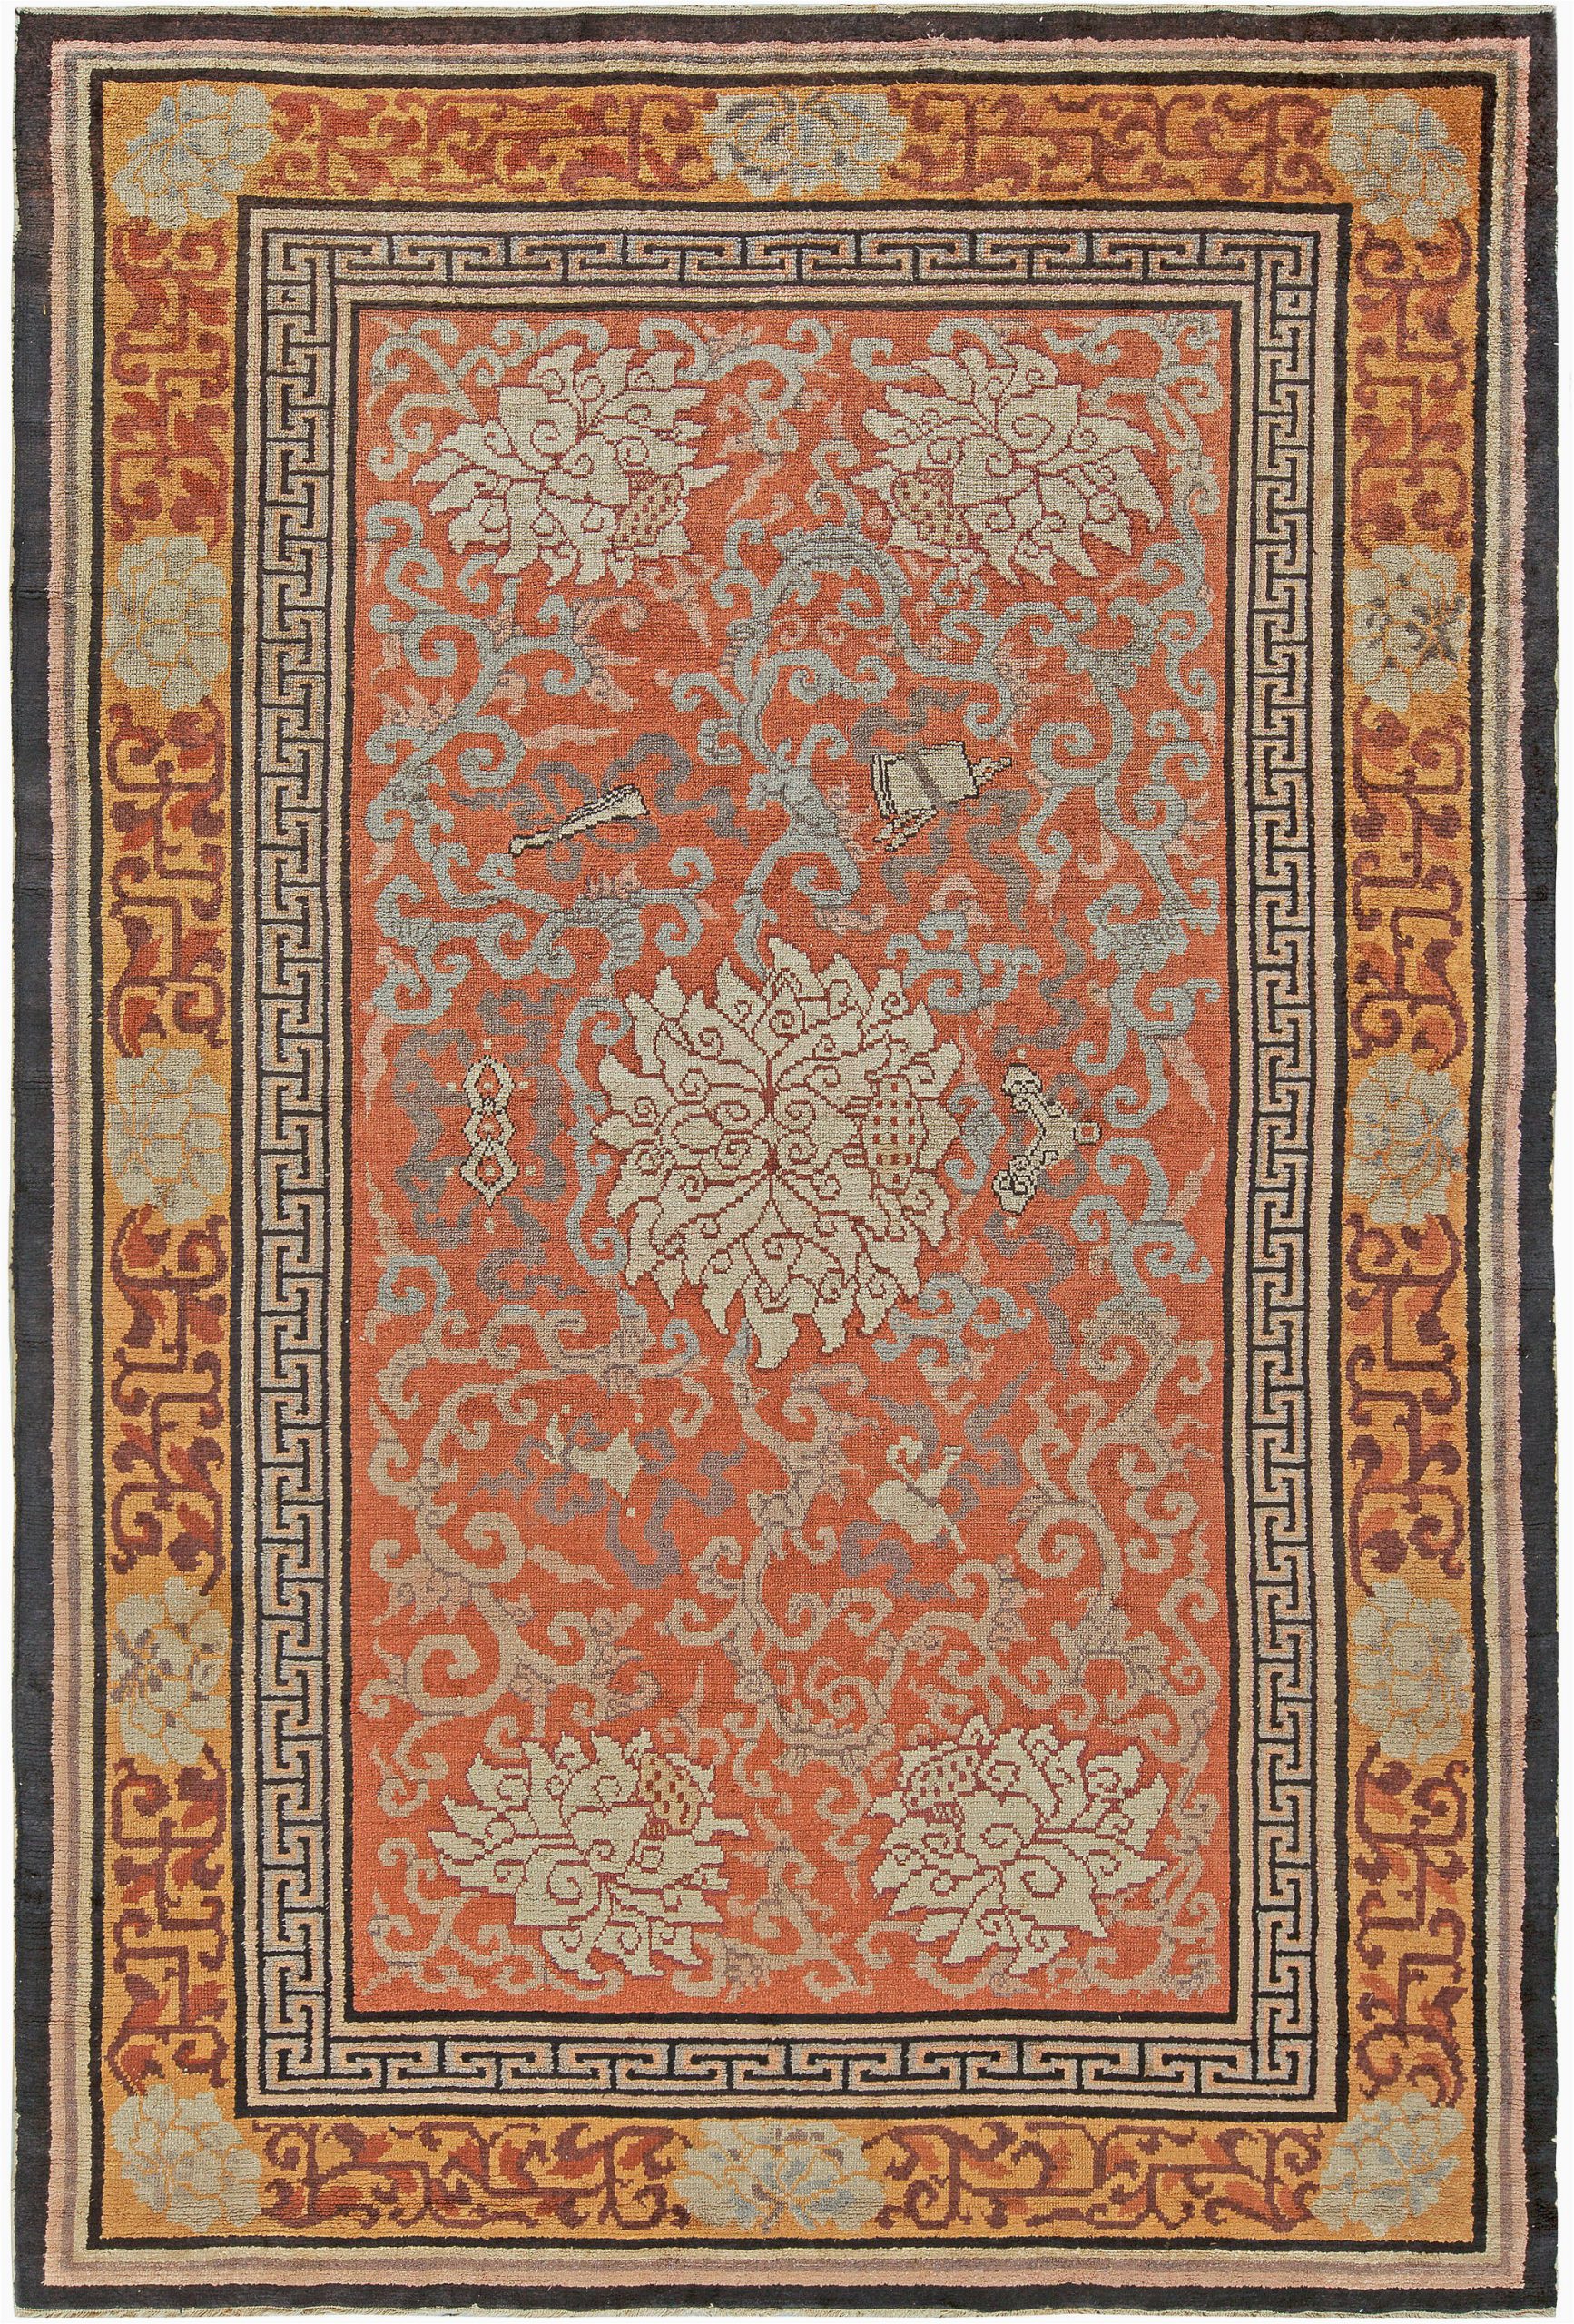 Art Deco Style area Rugs Vintage Chinese orange Cream and Gray Hand Knotted Silk Rug